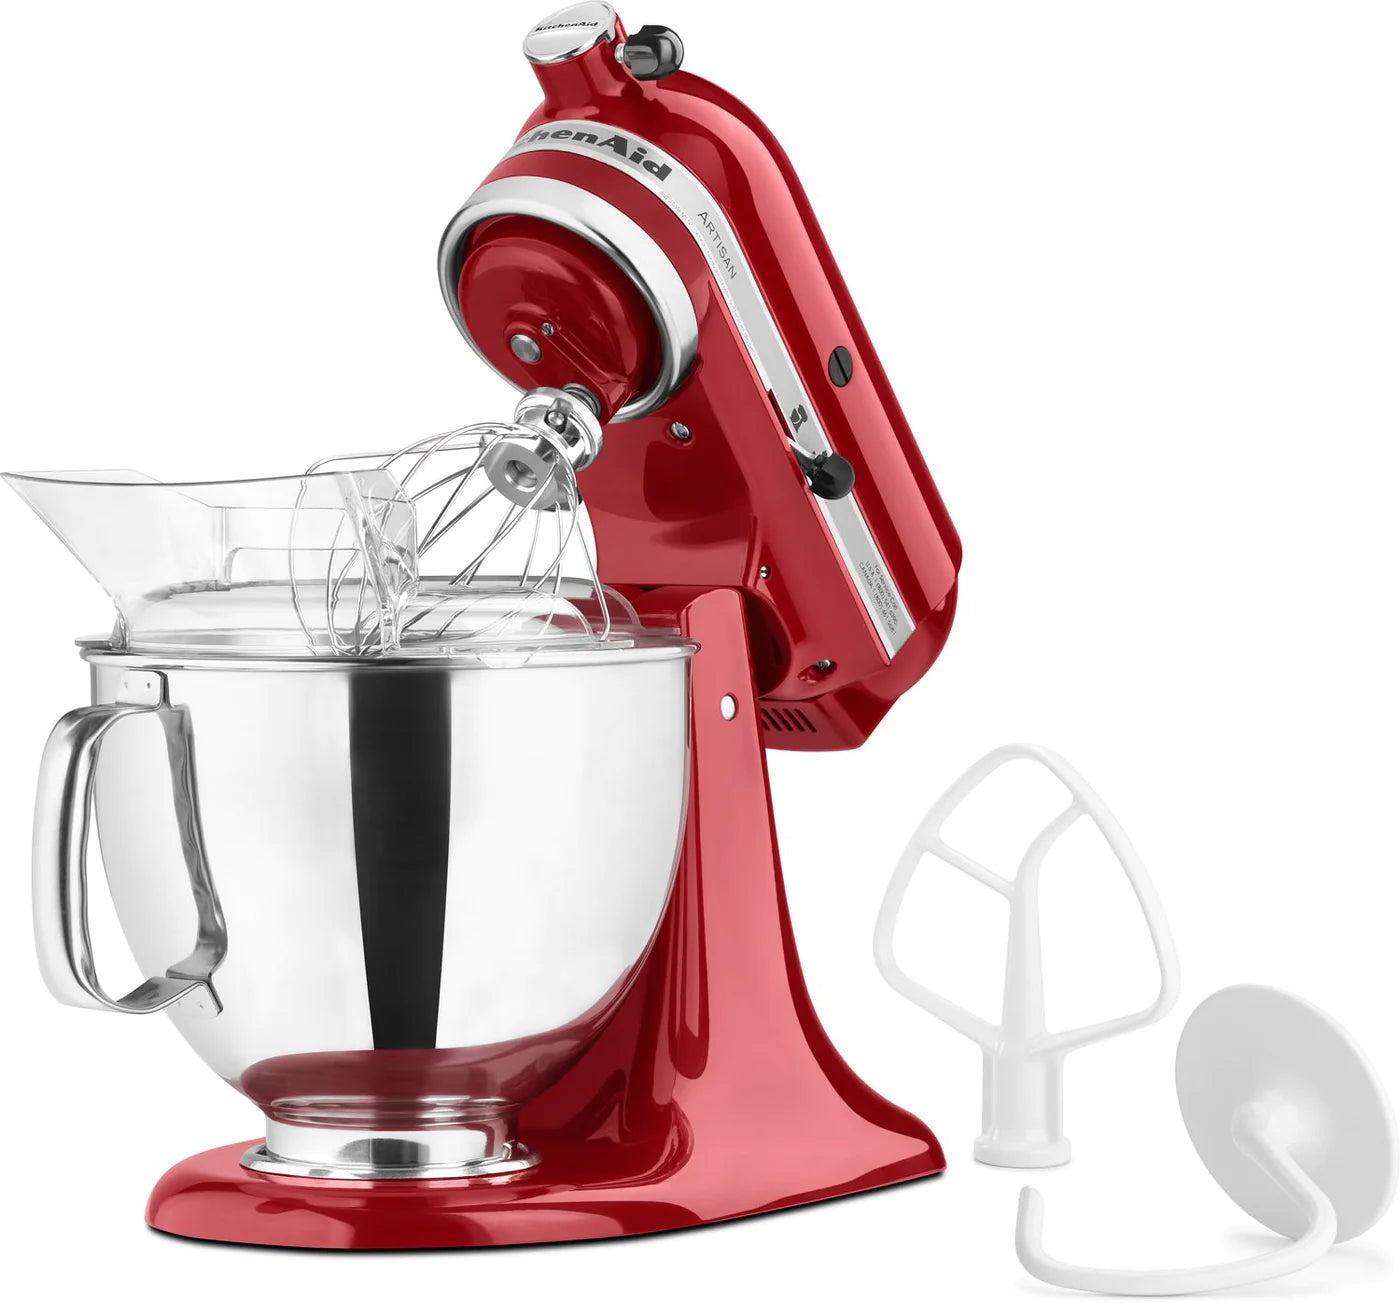 KitchenAid Artisan 5 Qt. 10-Speed Empire Red Stand Mixer with Flat Beater, 6-Wire Whip and Dough Hook Attachments